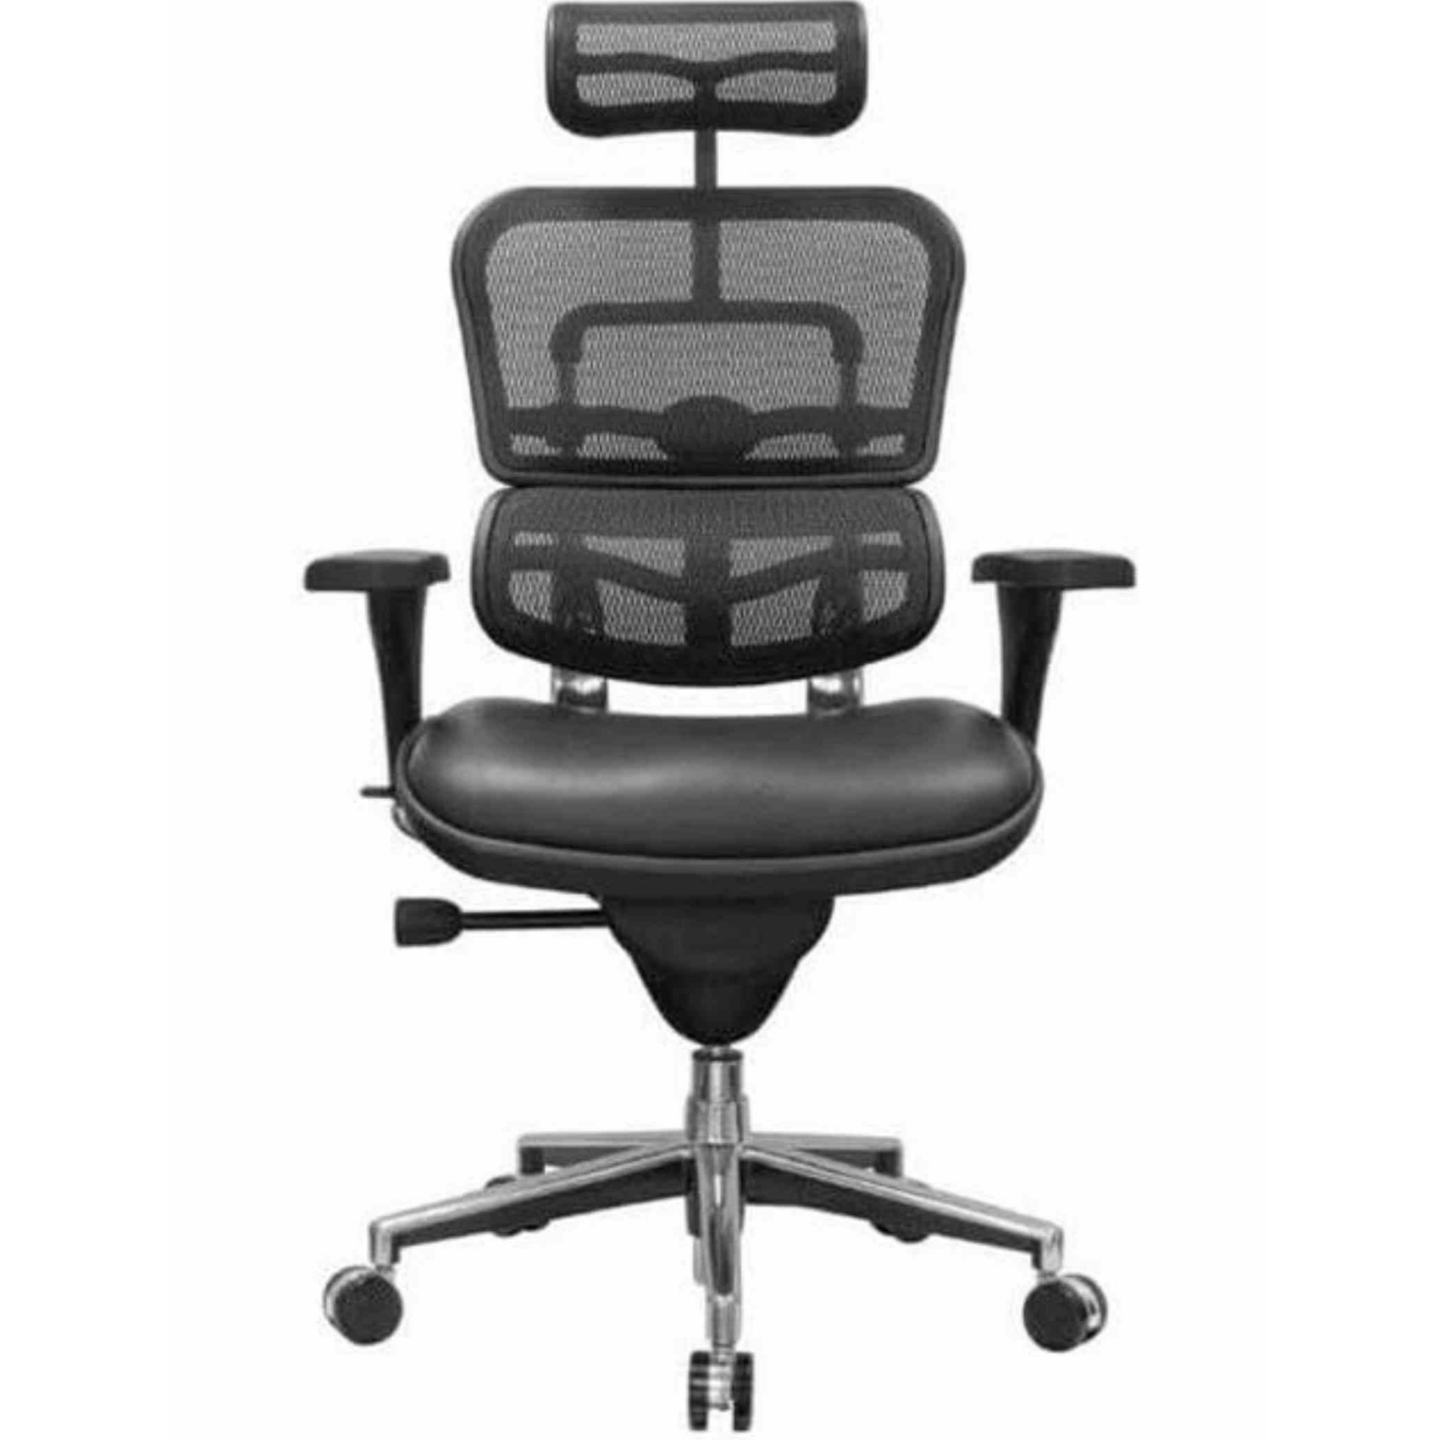 How to select the proper Office Chair for your workspace?